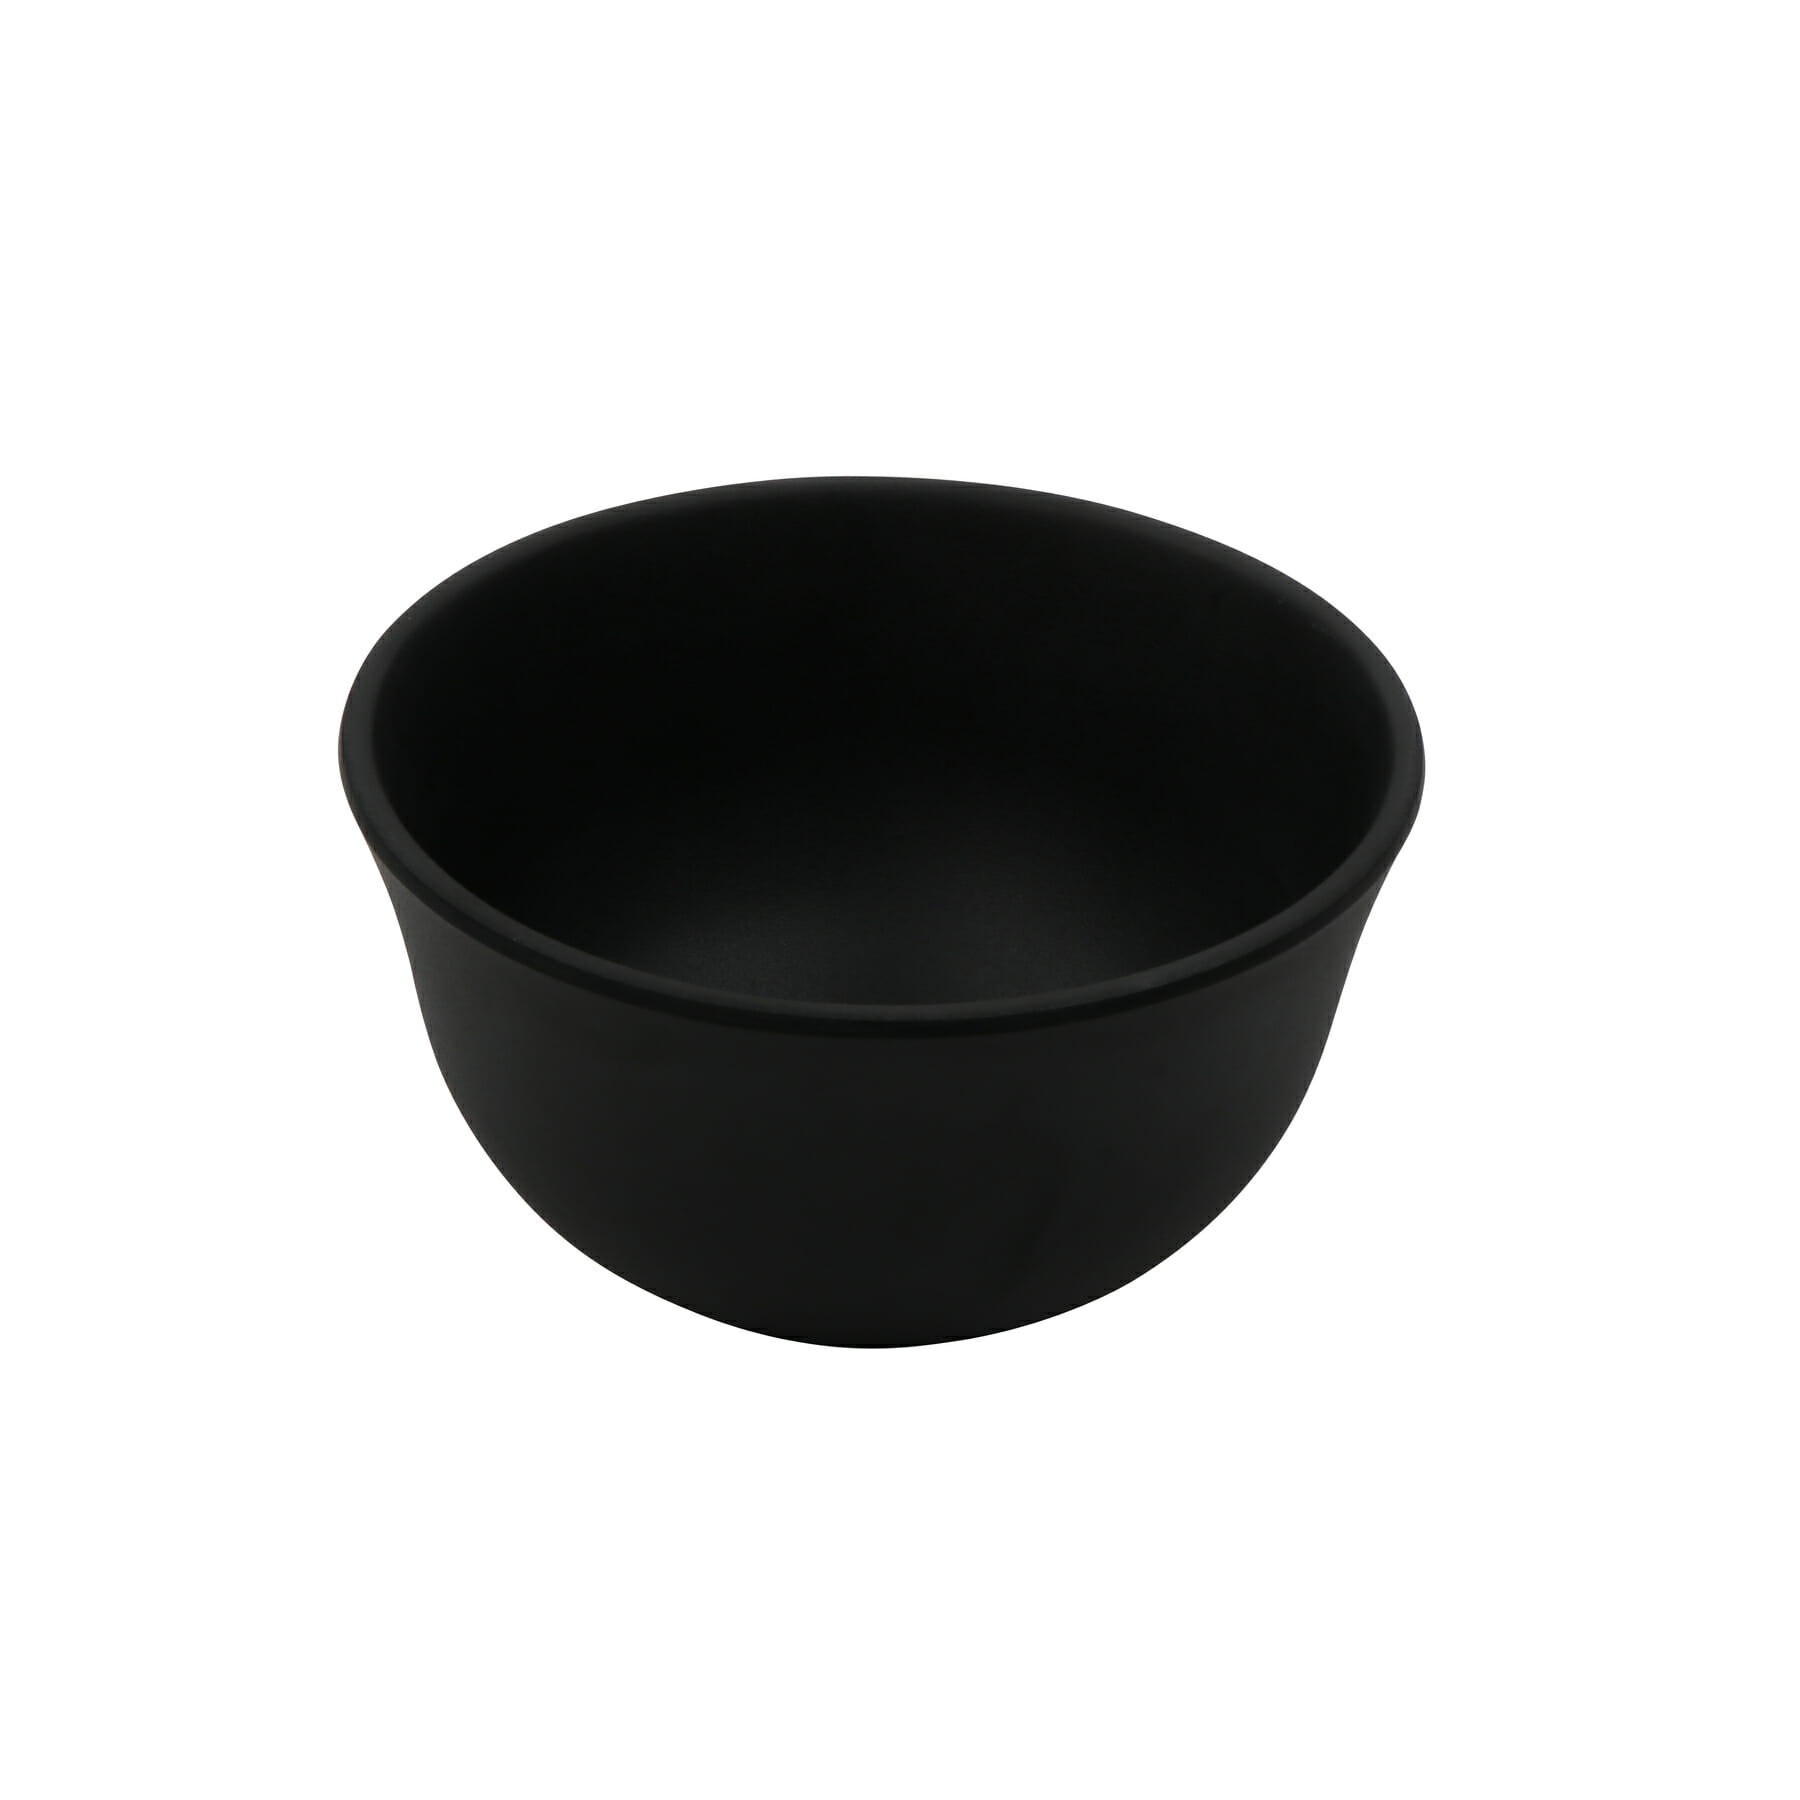 Japanese Rice and Soup Bowls With Lid, All Black, Melamine H